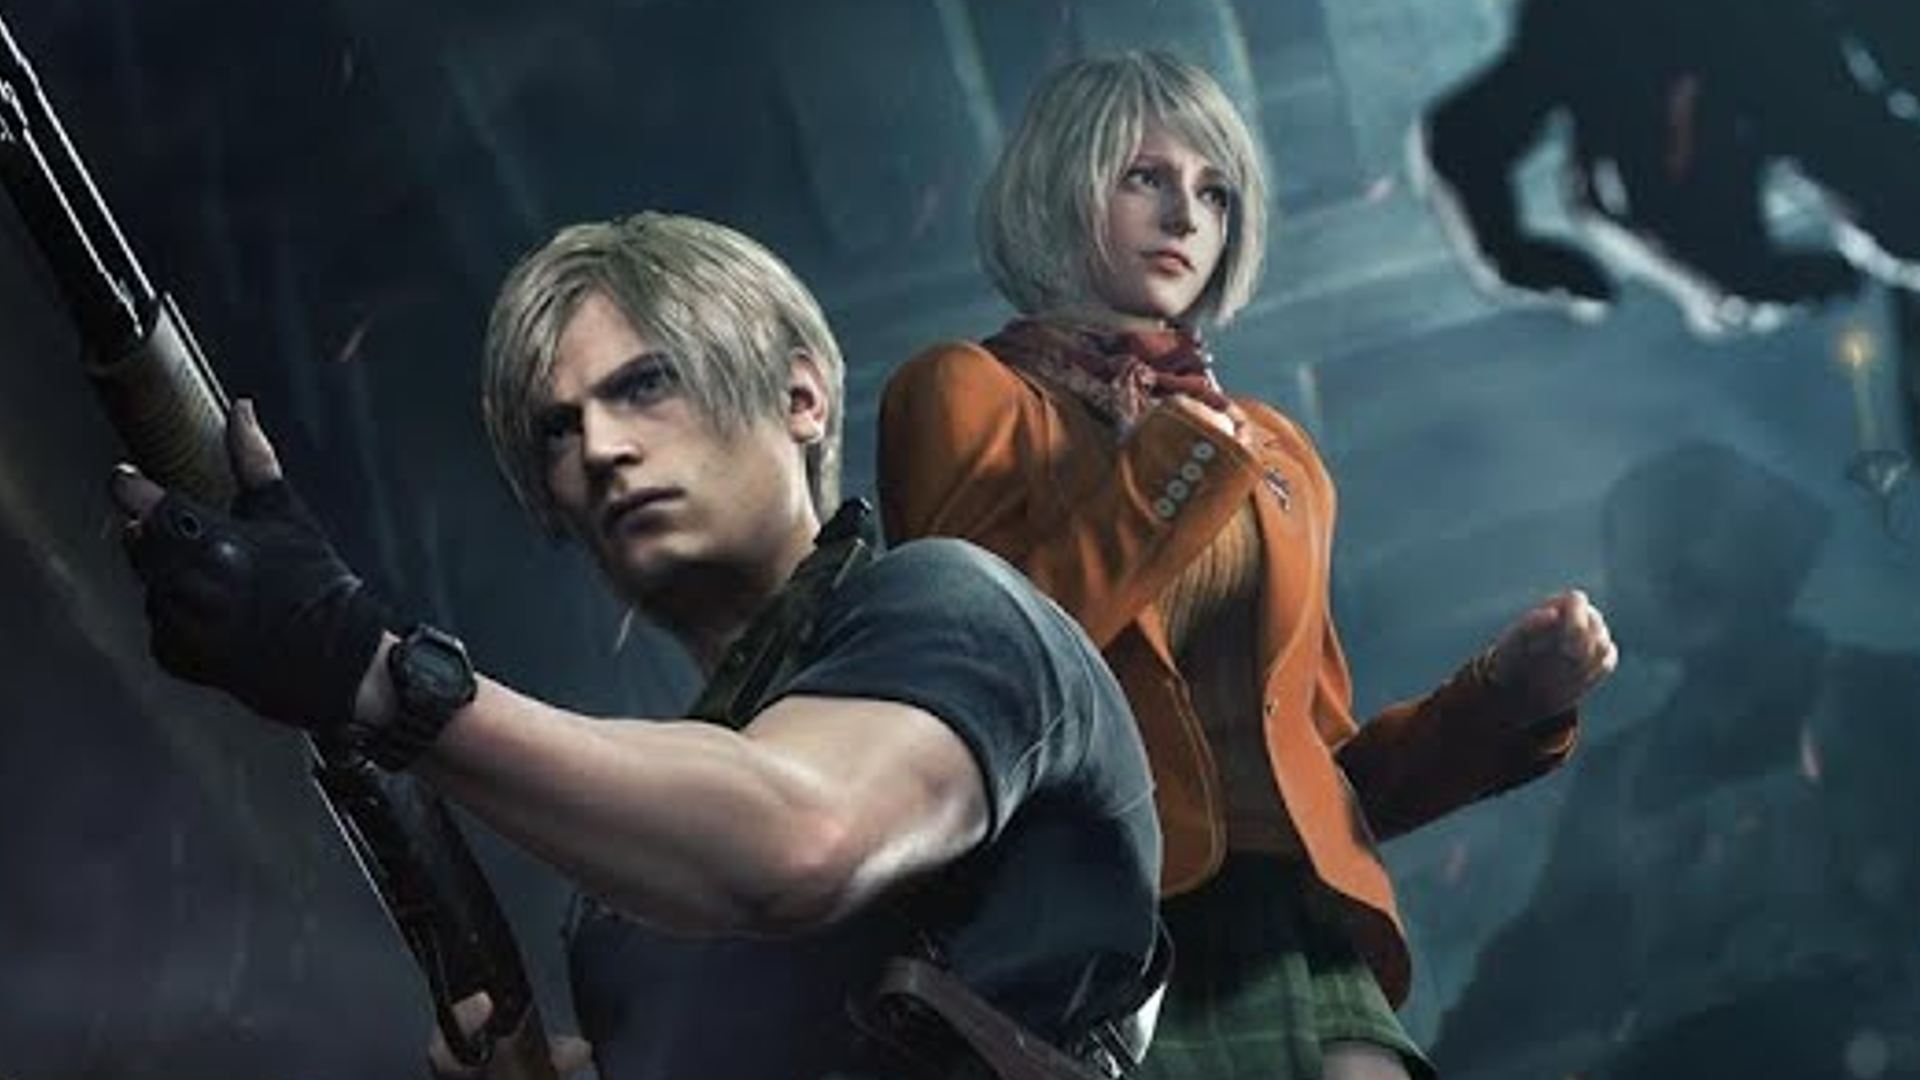 Resident Evil 4 Remake Review: Ashley and Leon canbe seen